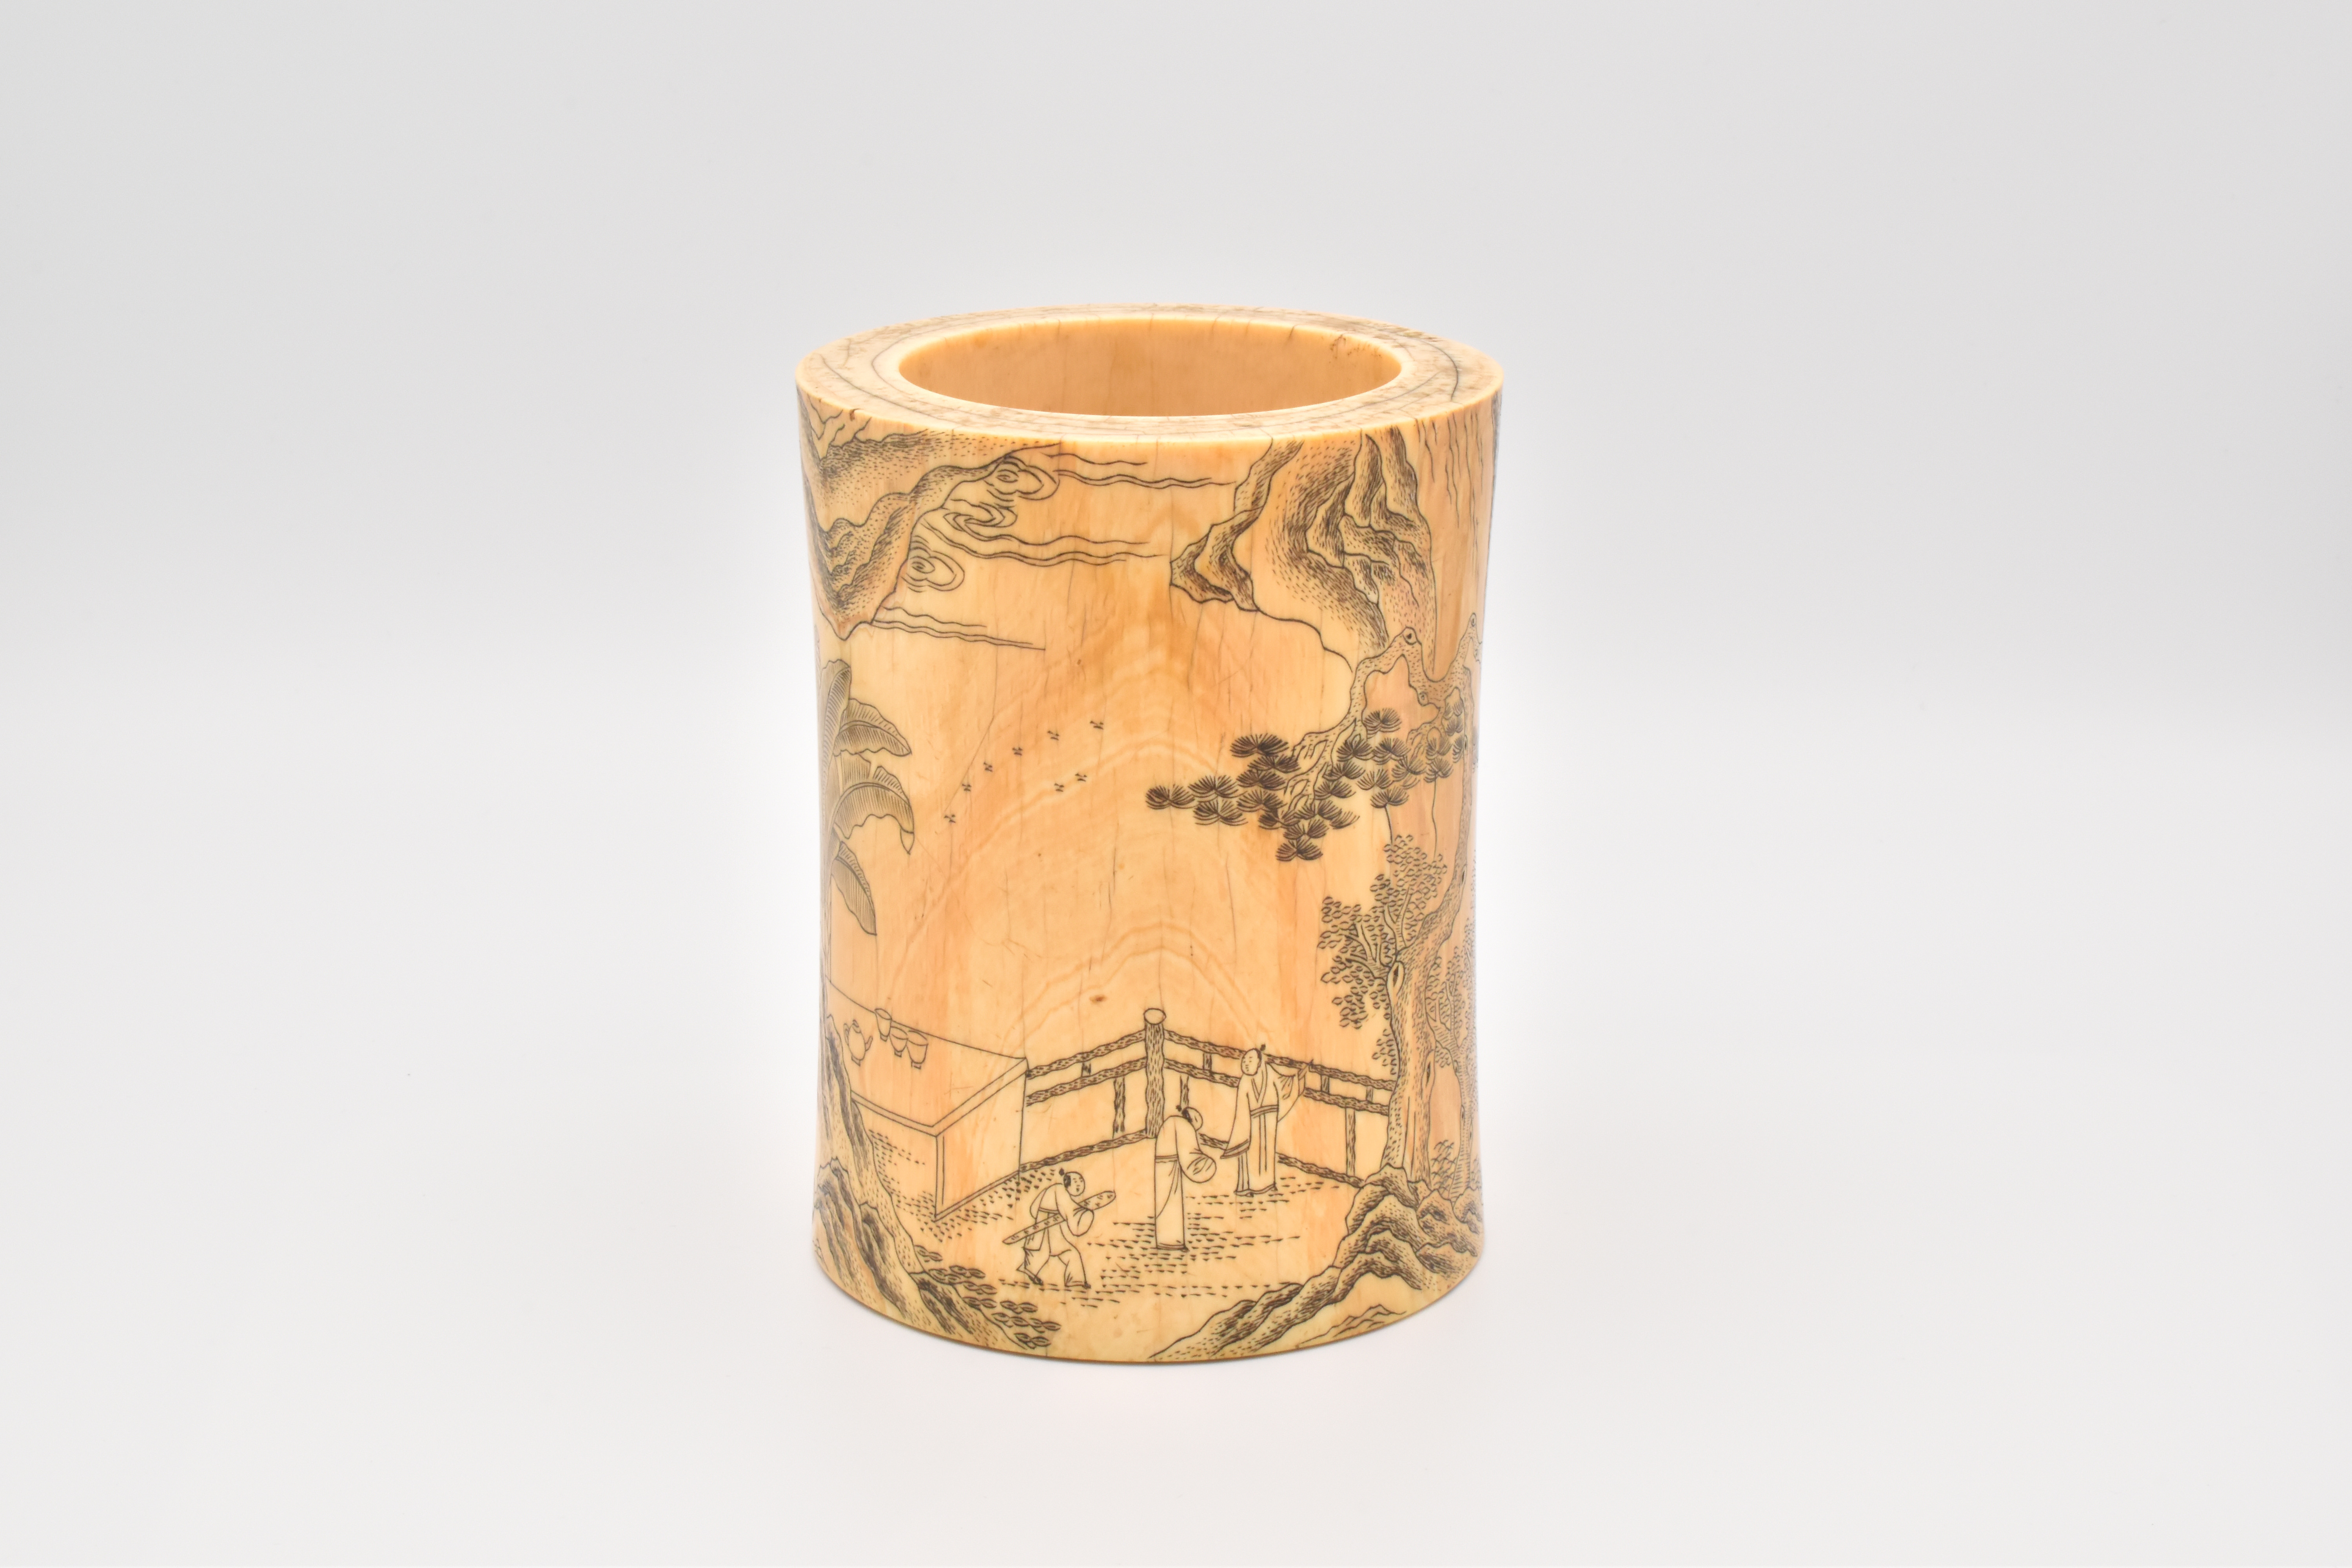 A CHINESE IVORY BRUSH POT, QING DYNASTY, 18TH/19TH CENTURY